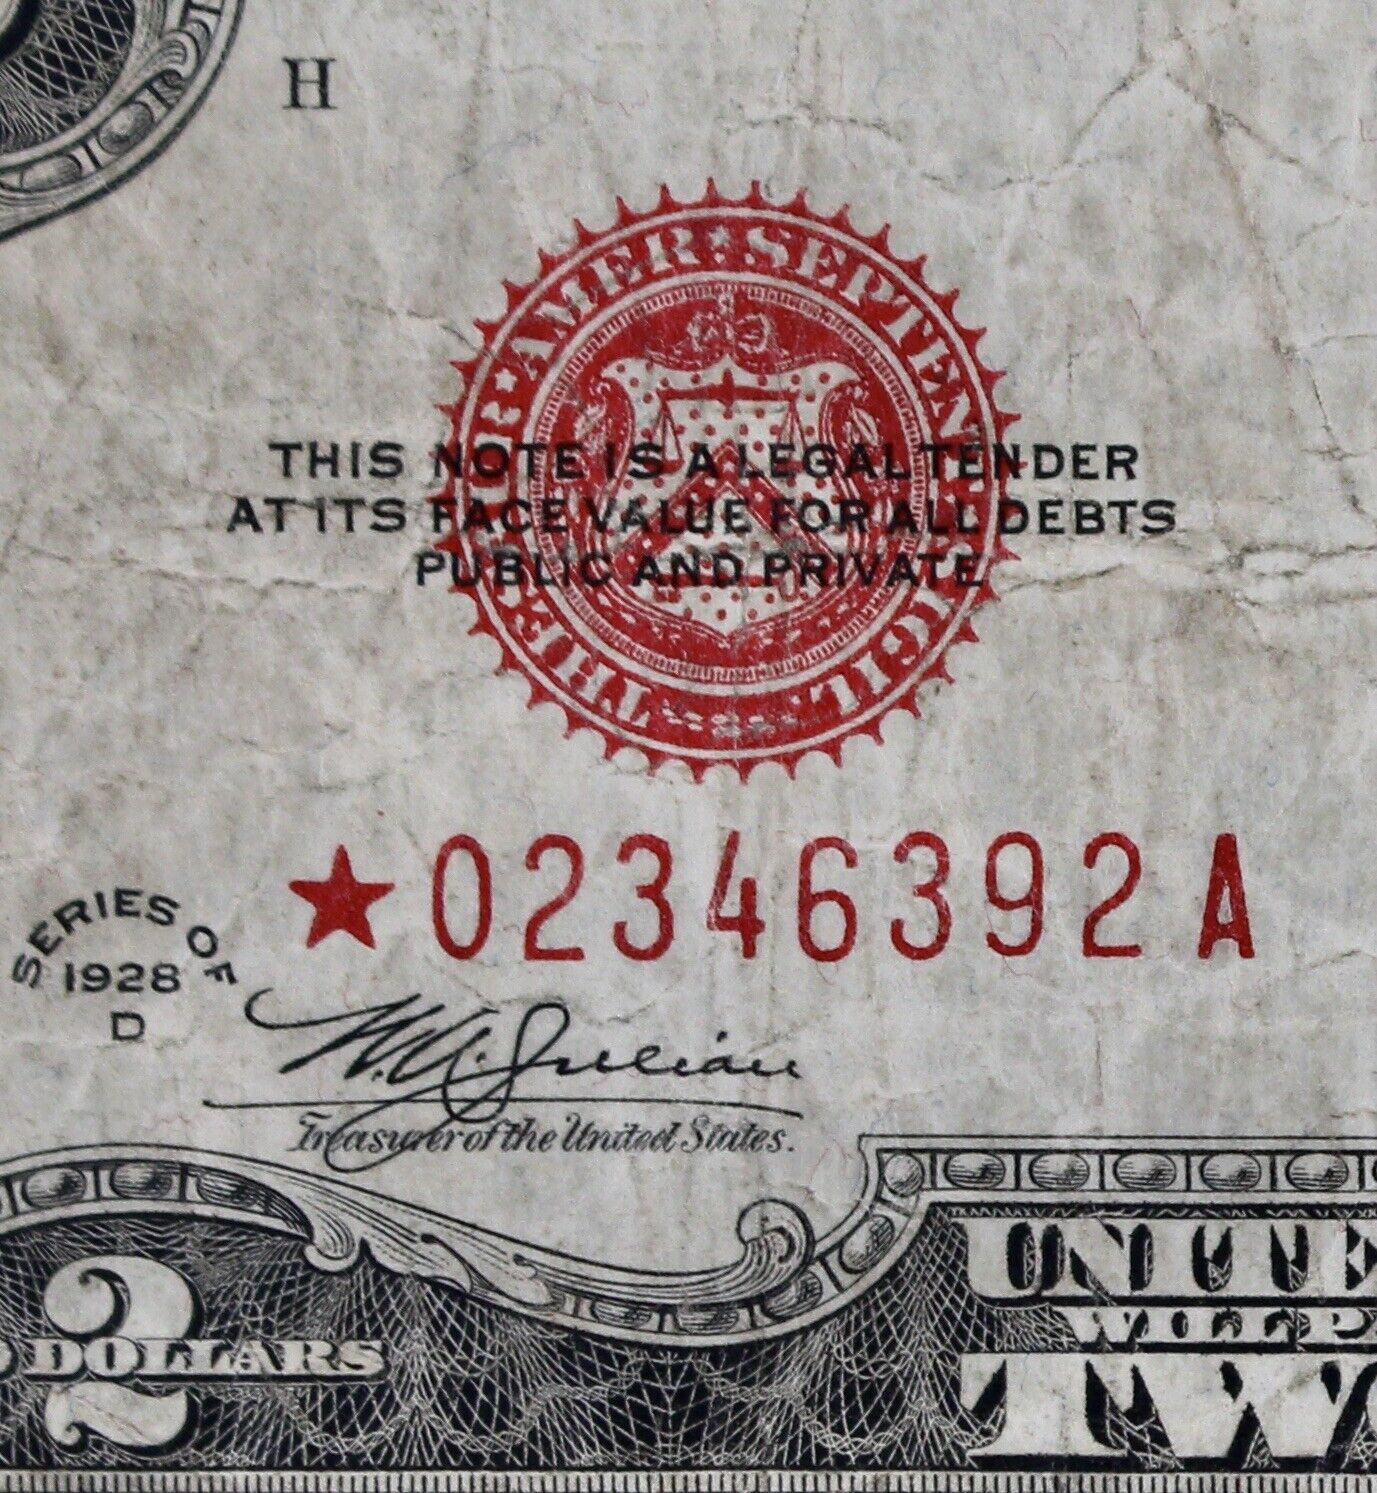 $2 1928D Star Mule red seal US Legal Tender ser Note 02346392A free High quality shipping